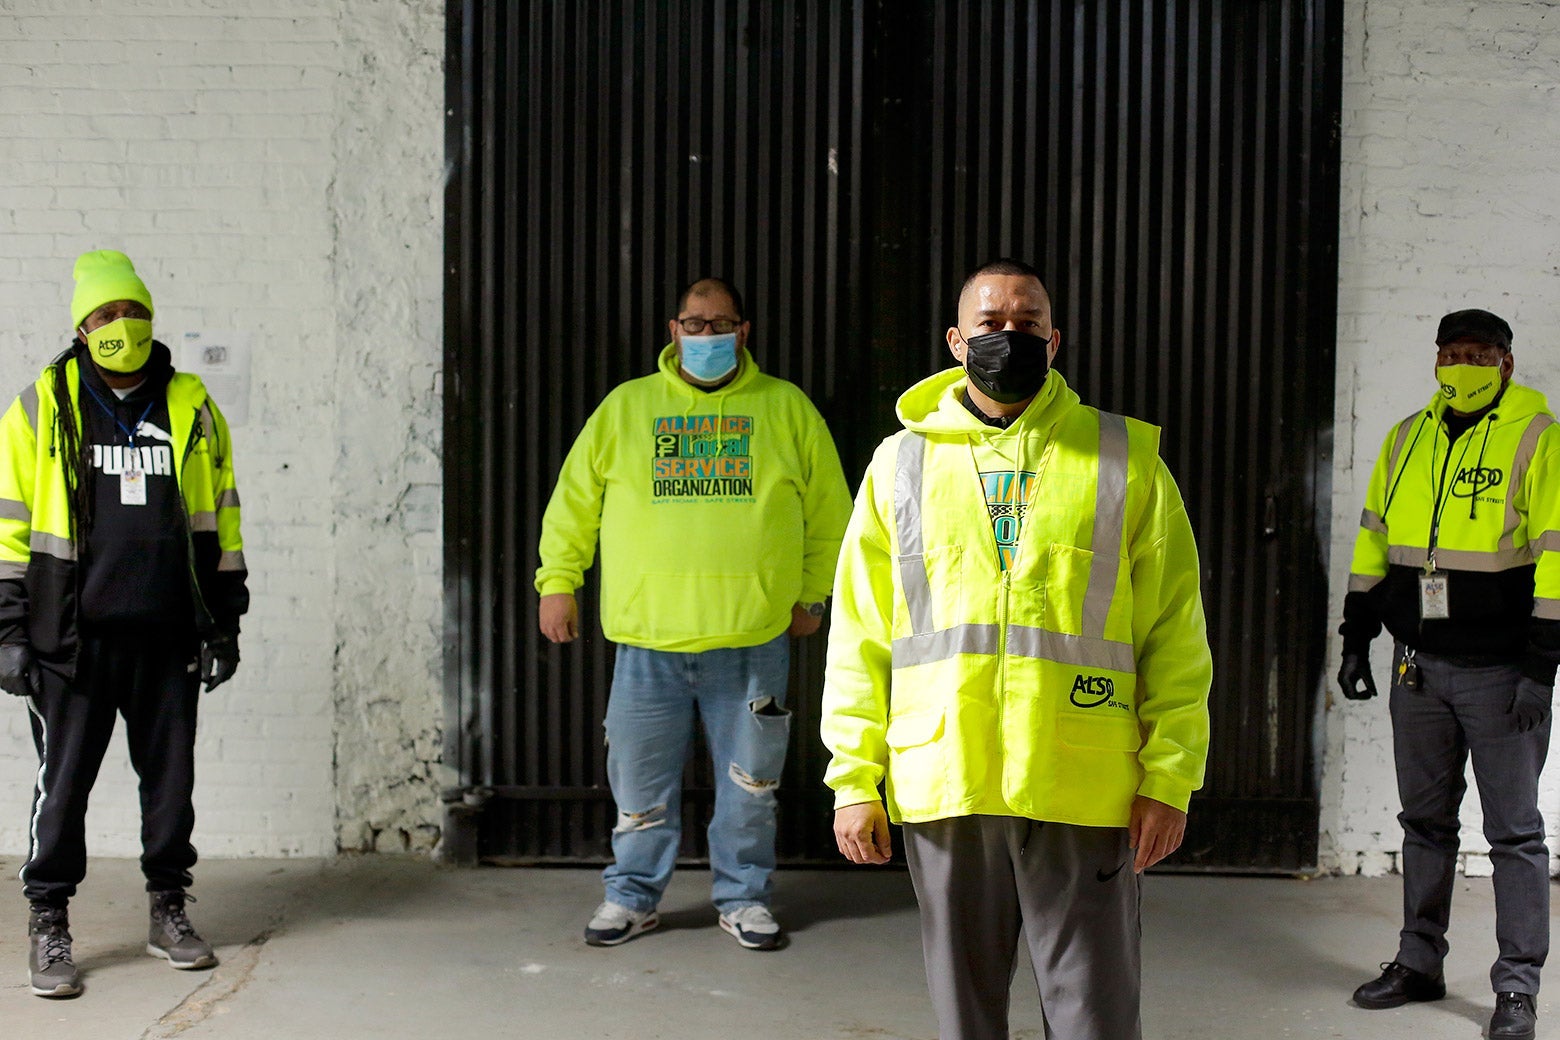 Four people wearing bright safety jackets and masks, standing a few feet apart from one another outside